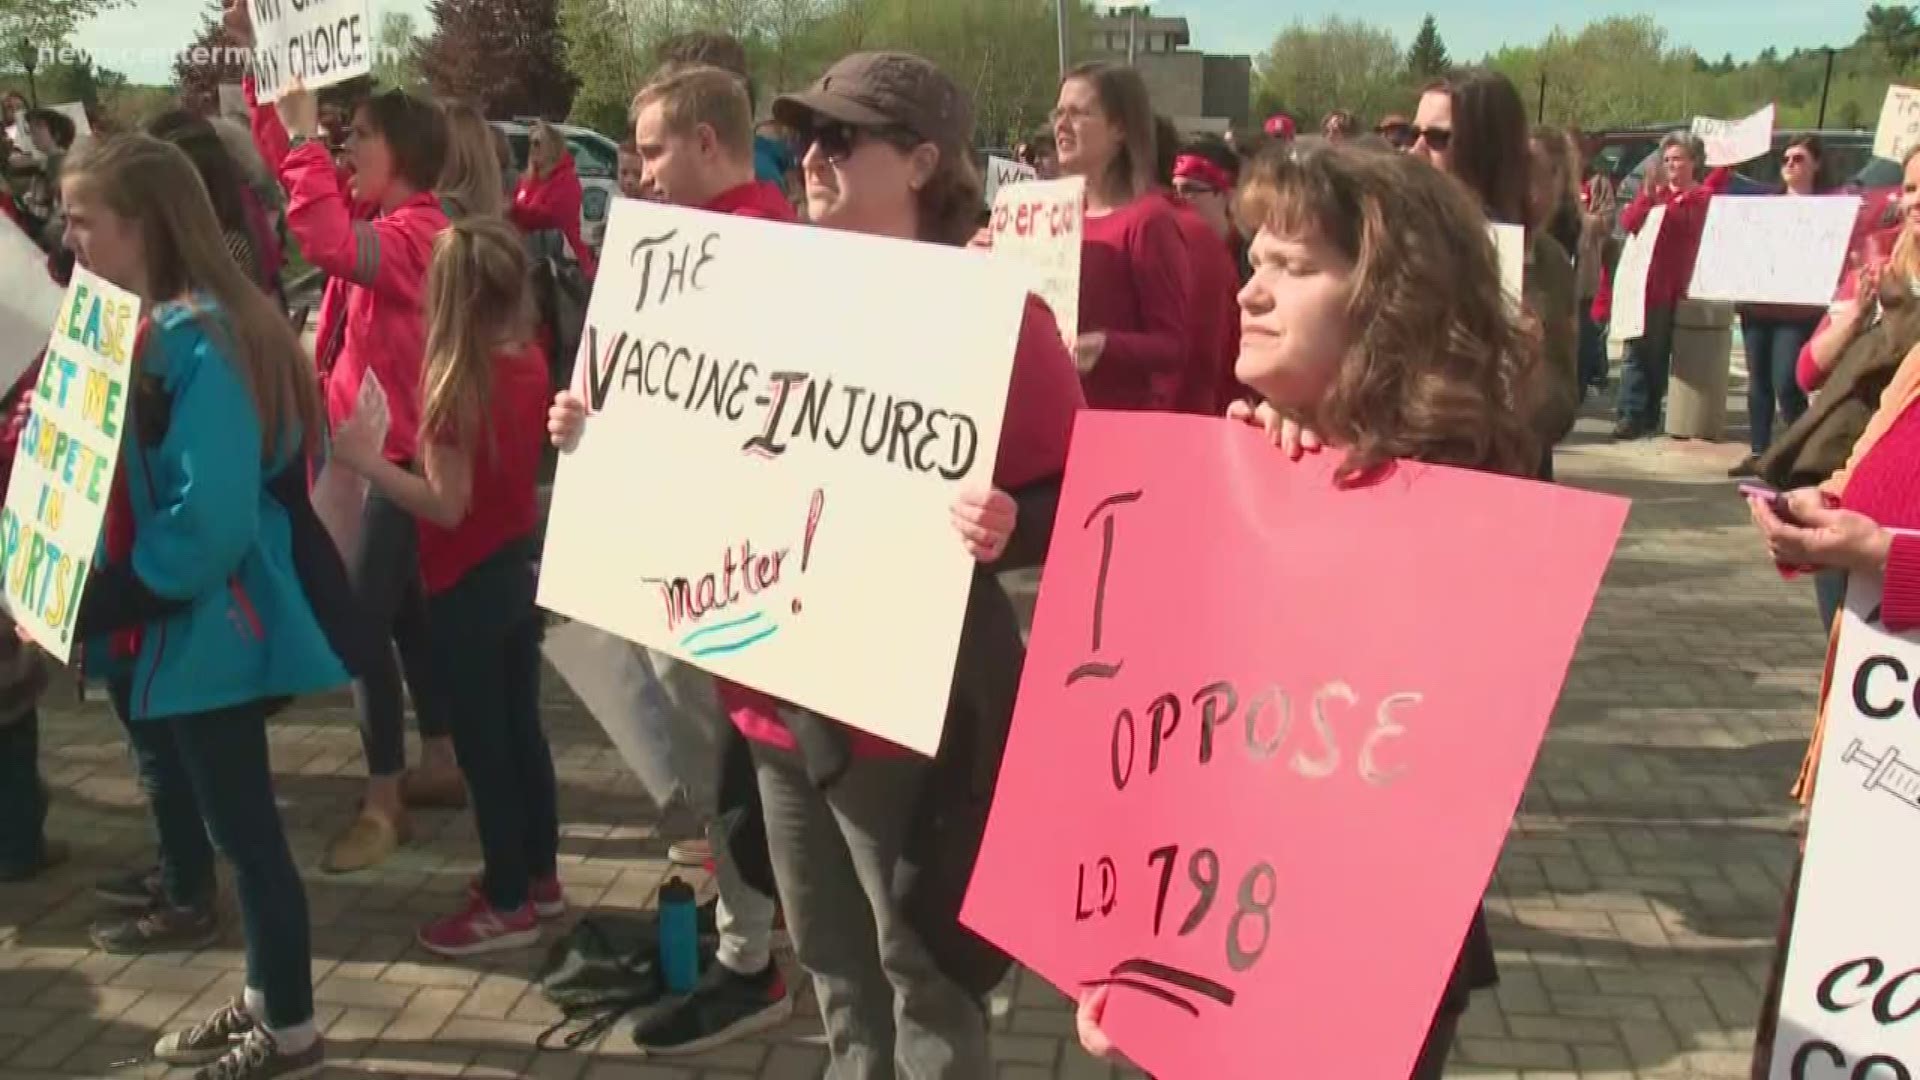 Protesters gathered in Augusta Thursday to rally against the mandatory vaccination bill now headed for a final vote in the Senate.